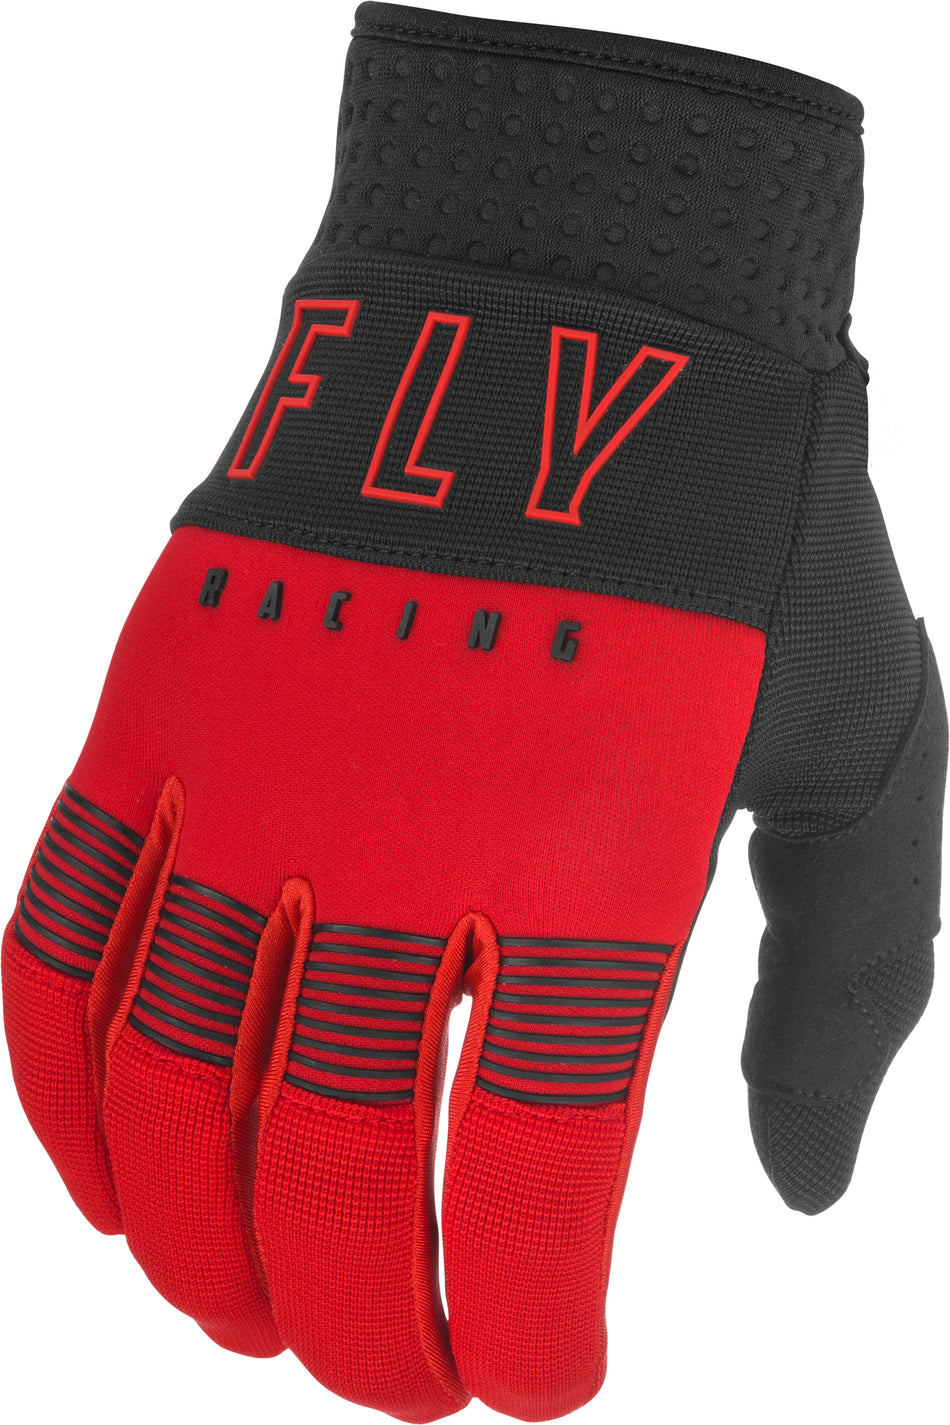 FLY RACING Youth F-16 Gloves Red/Black Sz 04 374-91204